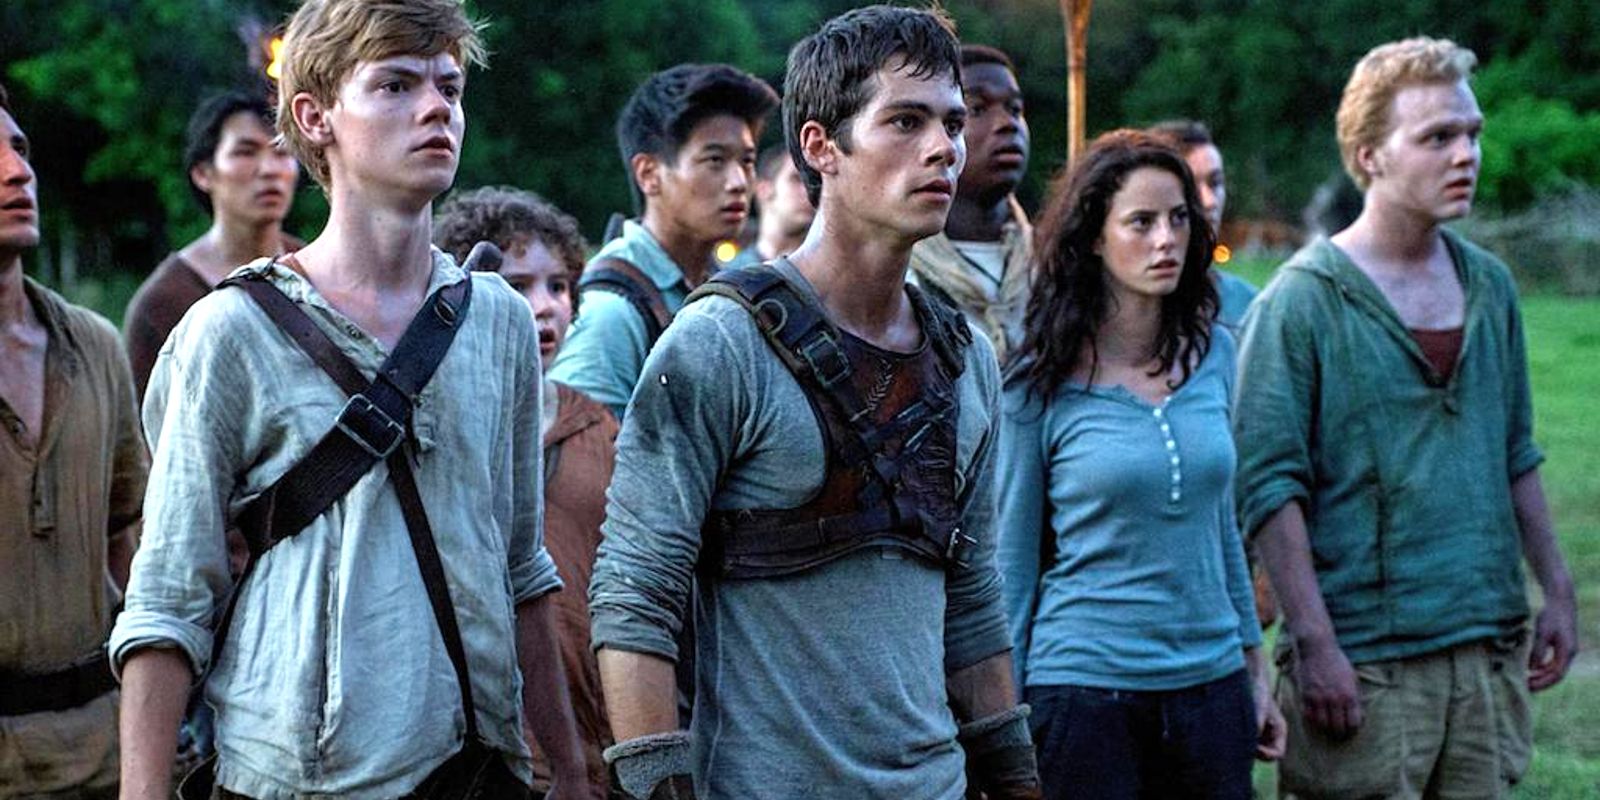 The Gladers stand together looking off into the distance in The Maze Runner